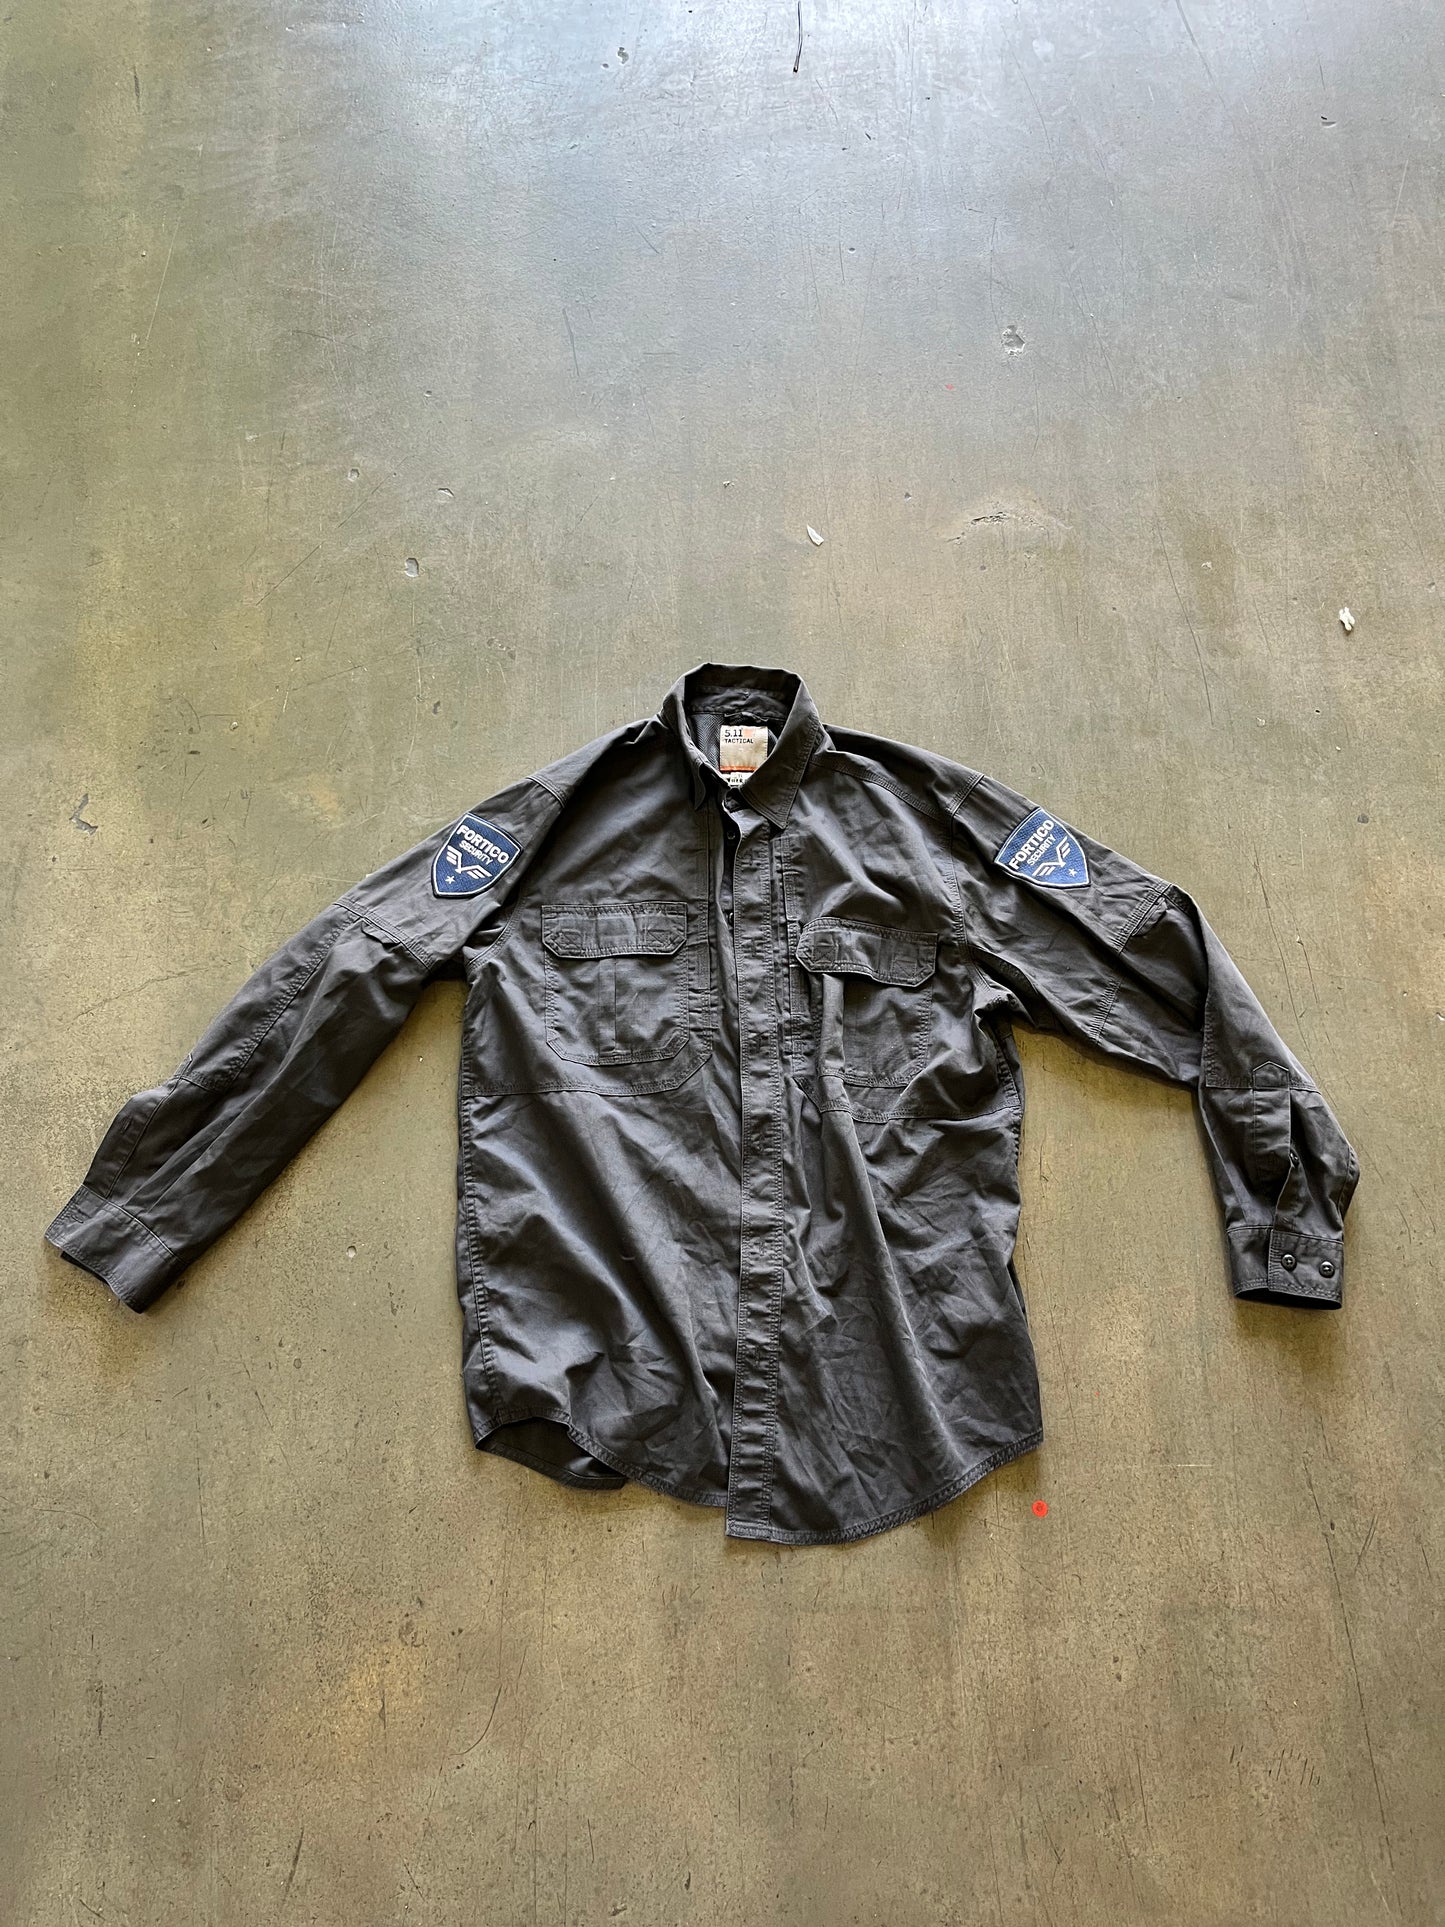 WRATH OF MAN: “H” HERO Fortico  Grey Blue Tactical Shirt and Pants